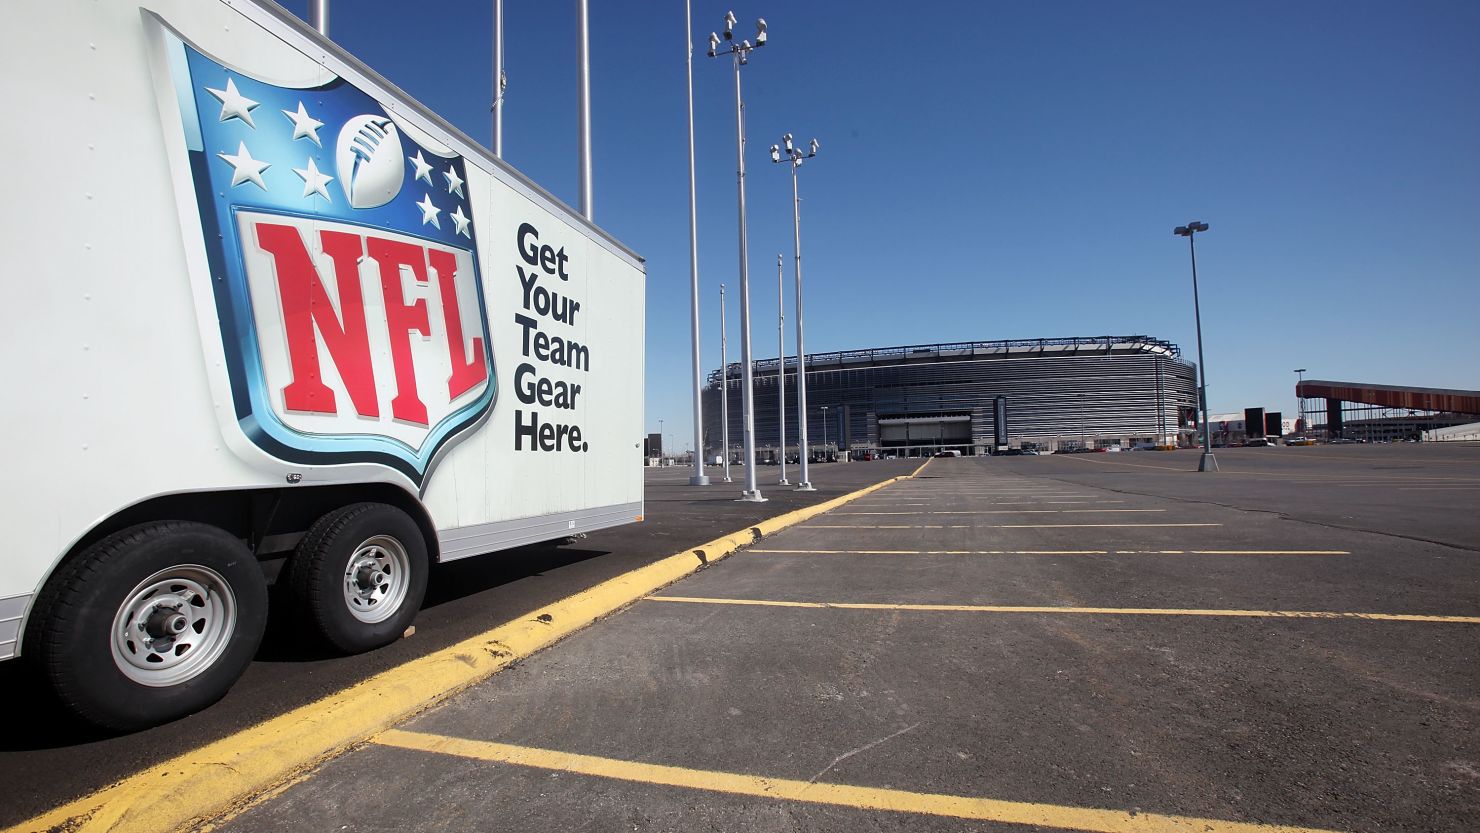 Of 28,000 parking spaces at MetLife Stadium in East Rutherford, New Jersey, 15,000 will be used for security and media during Super Bowl XLVII.